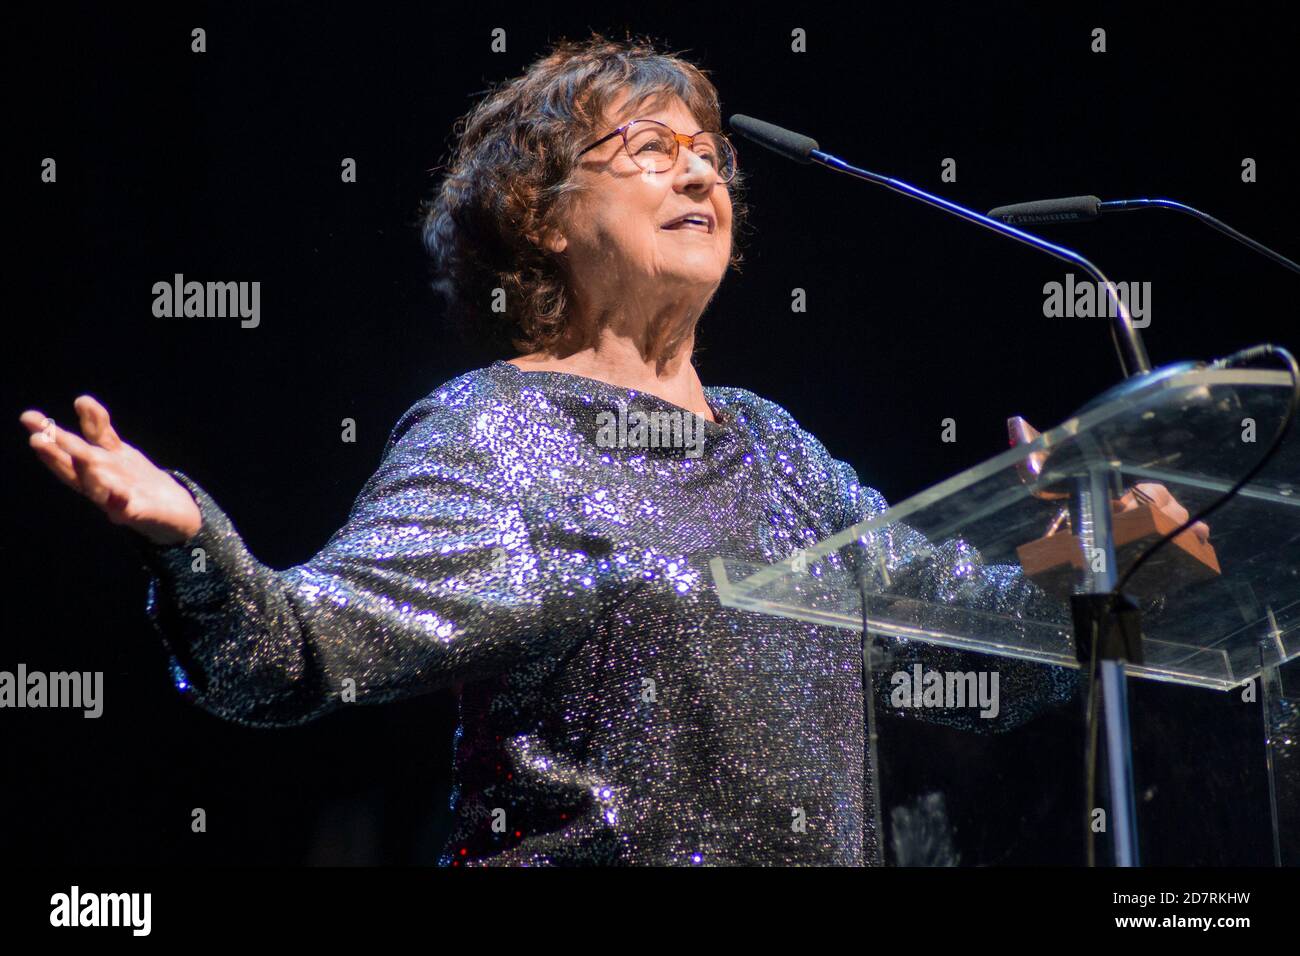 Julieta Serrano receives her award from 'Union de Actores' Awards 2020 at Teatro Circo Price in Madrid, Spain.March 09, 2020. (Oscar Gil / Alfa Images Stock Photo